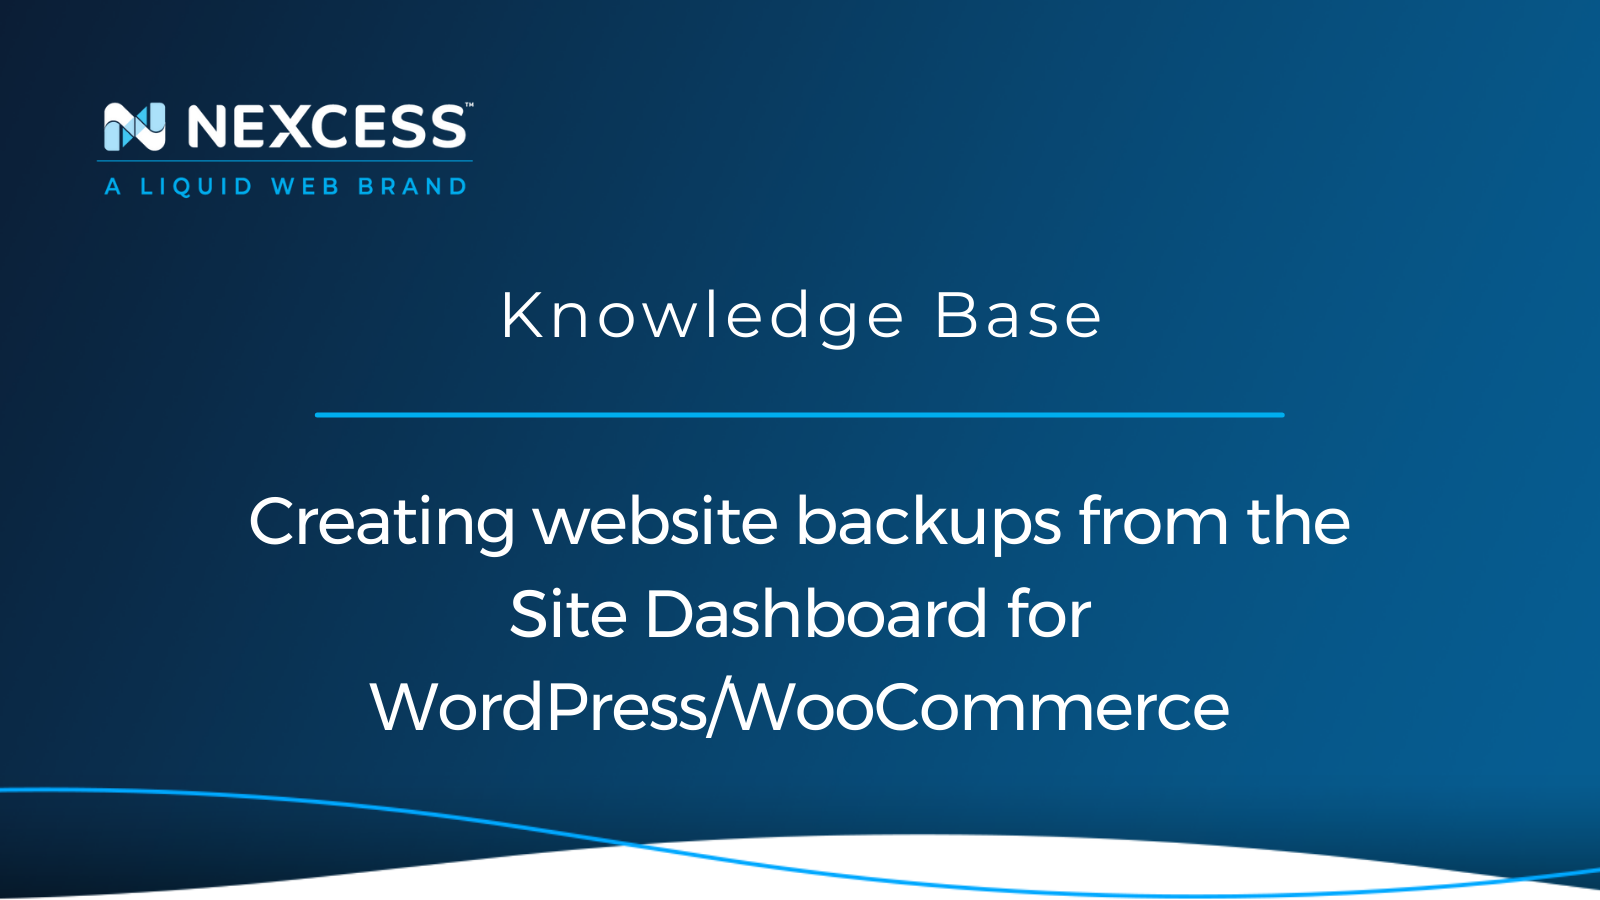 Creating website backups from the Site Dashboard for WordPress/WooCommerce